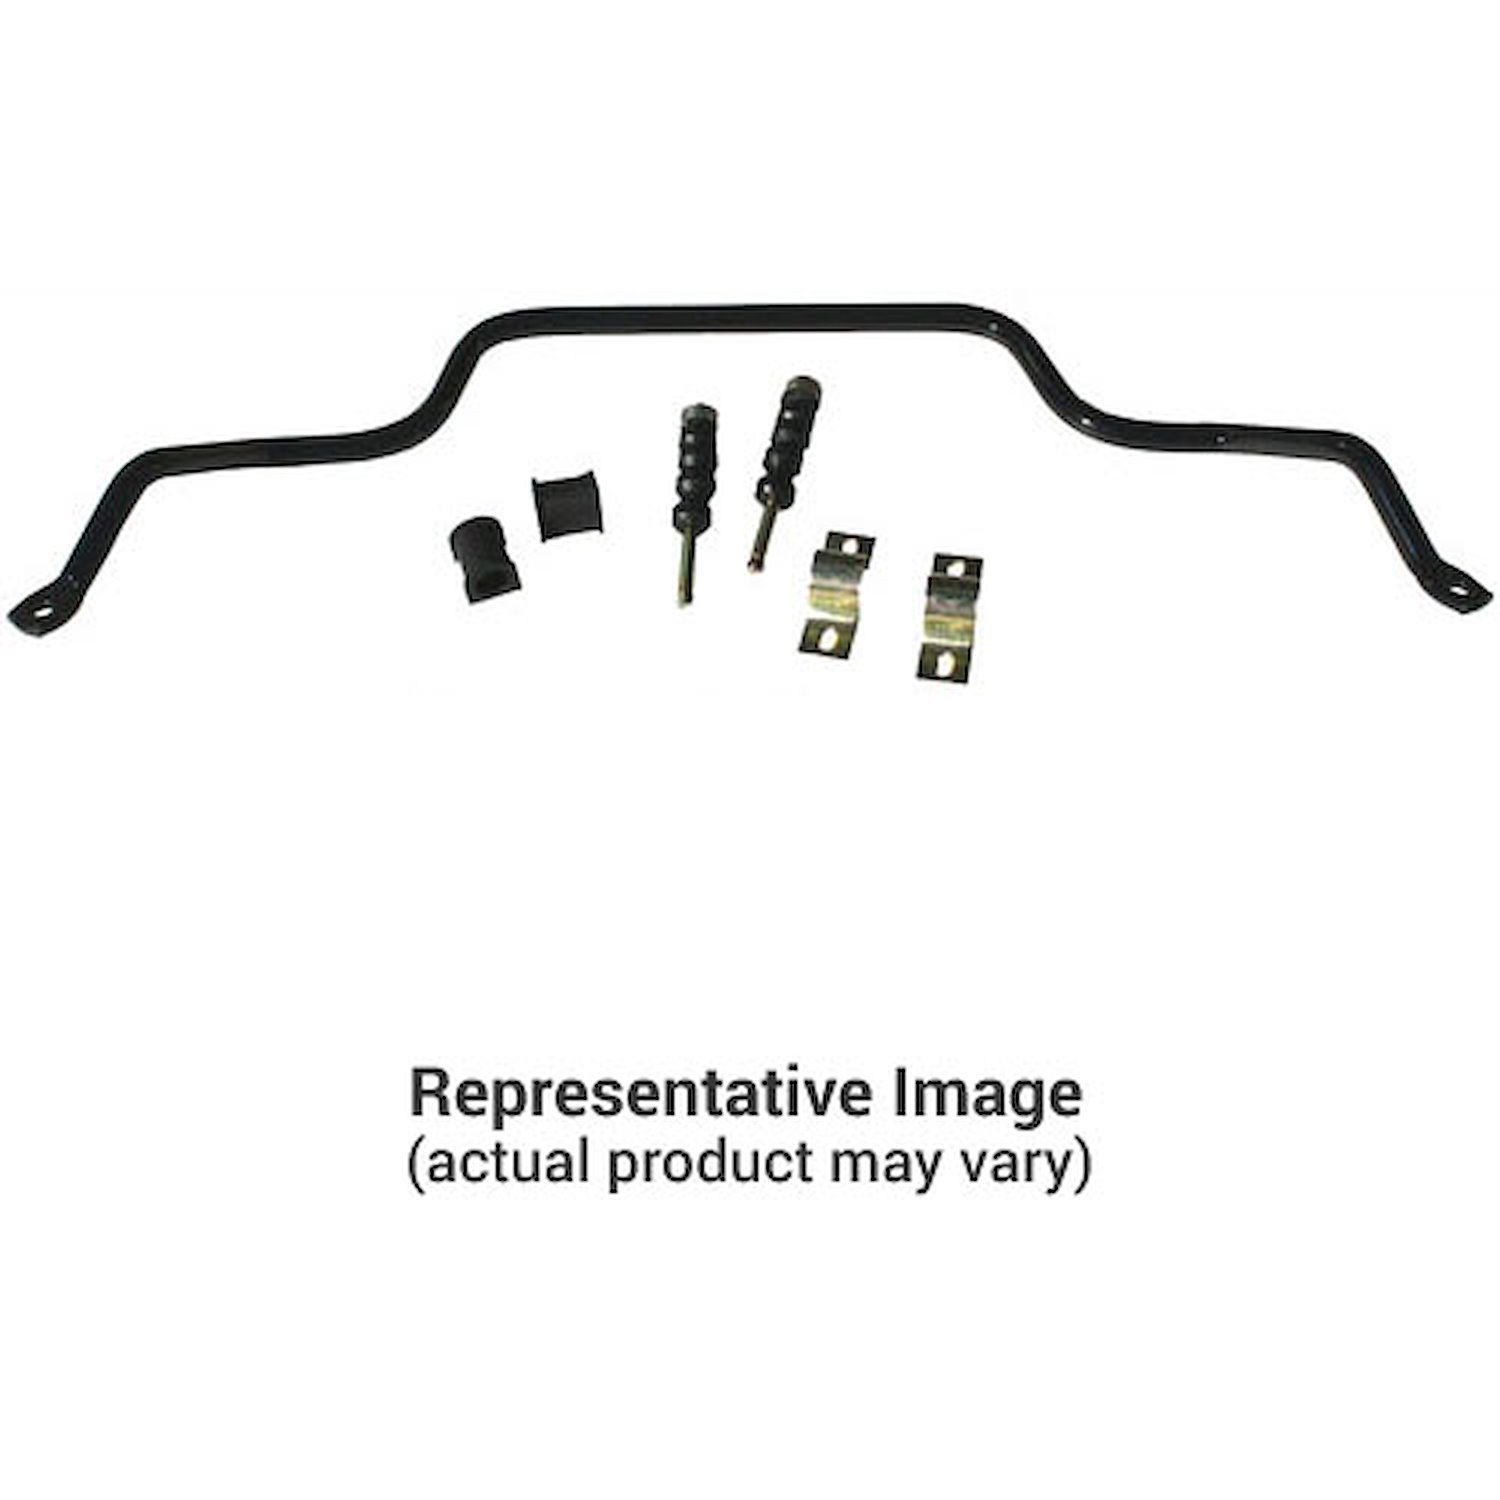 1 1/4" Front Sway Bar 2001-04 Ford F150 2WD